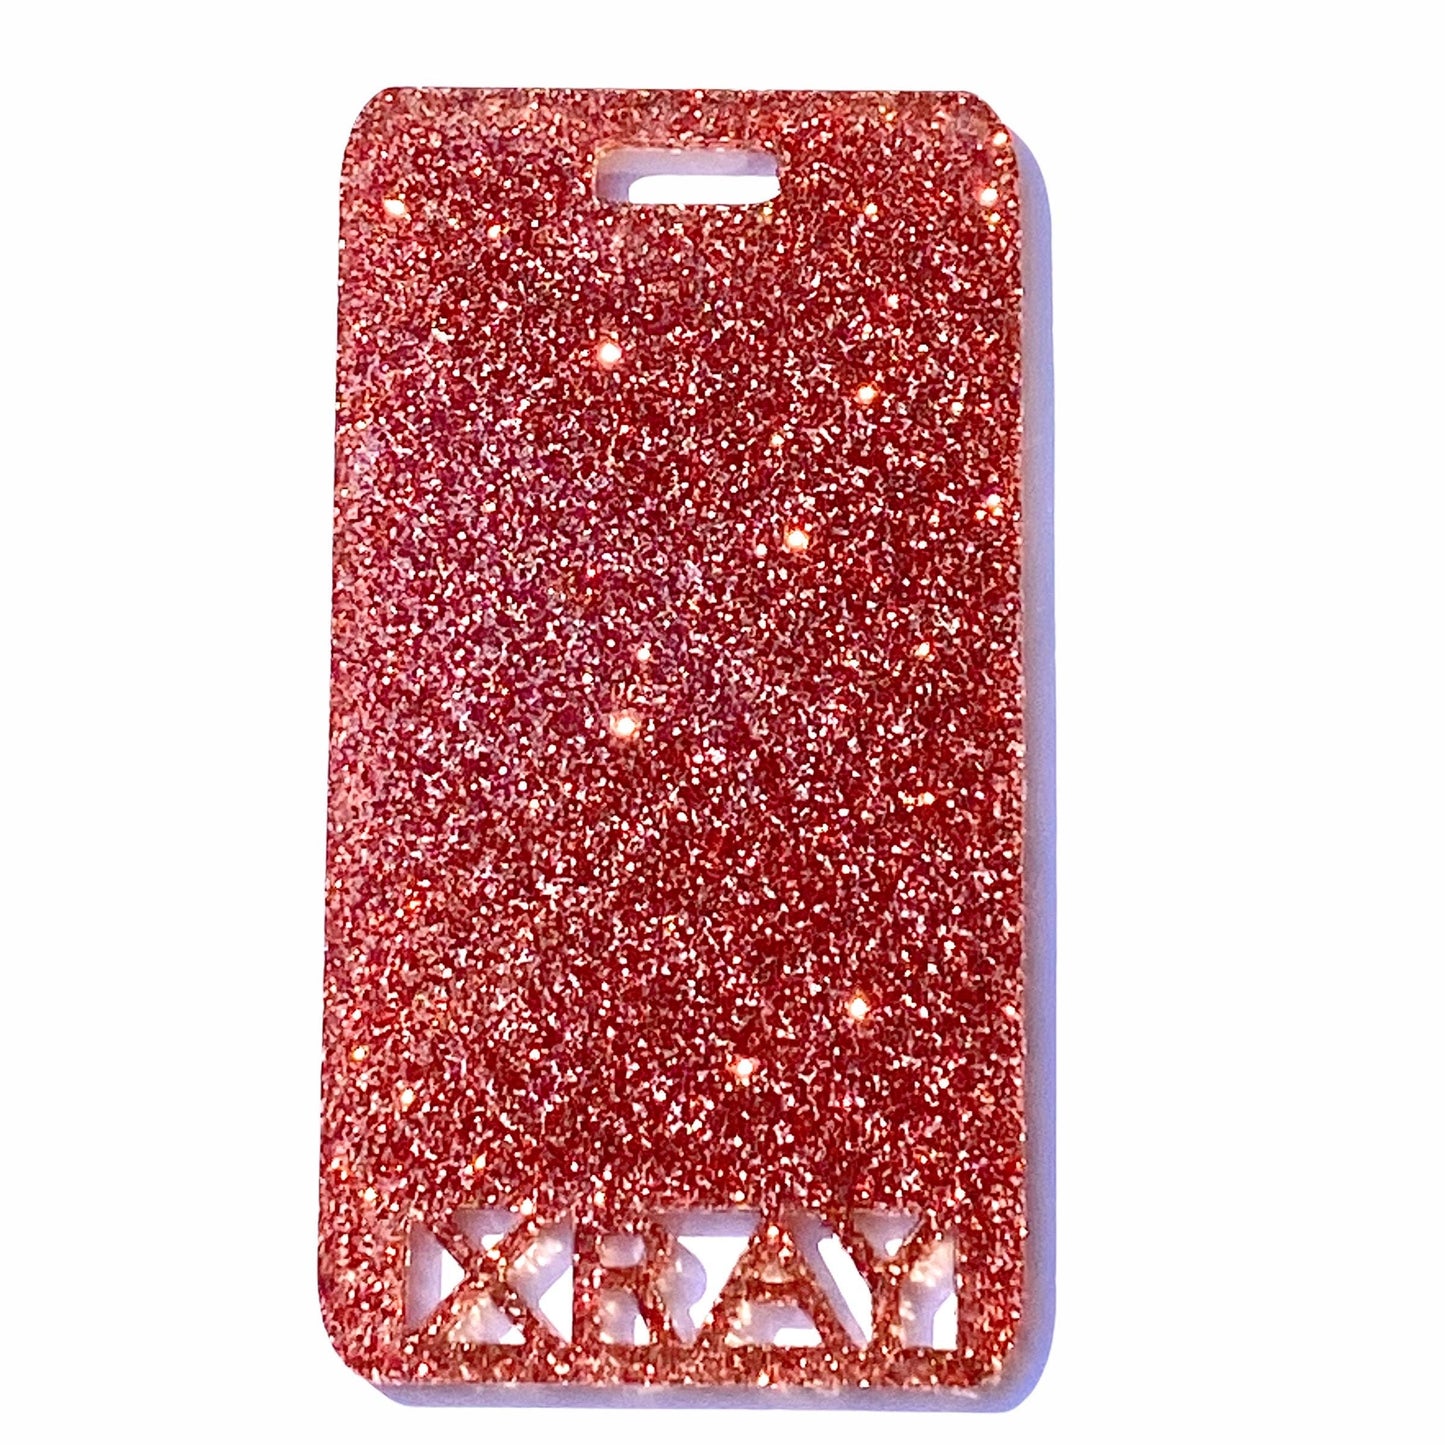 Rad Pad Rose Gold Glitter for Holding Xray Markers